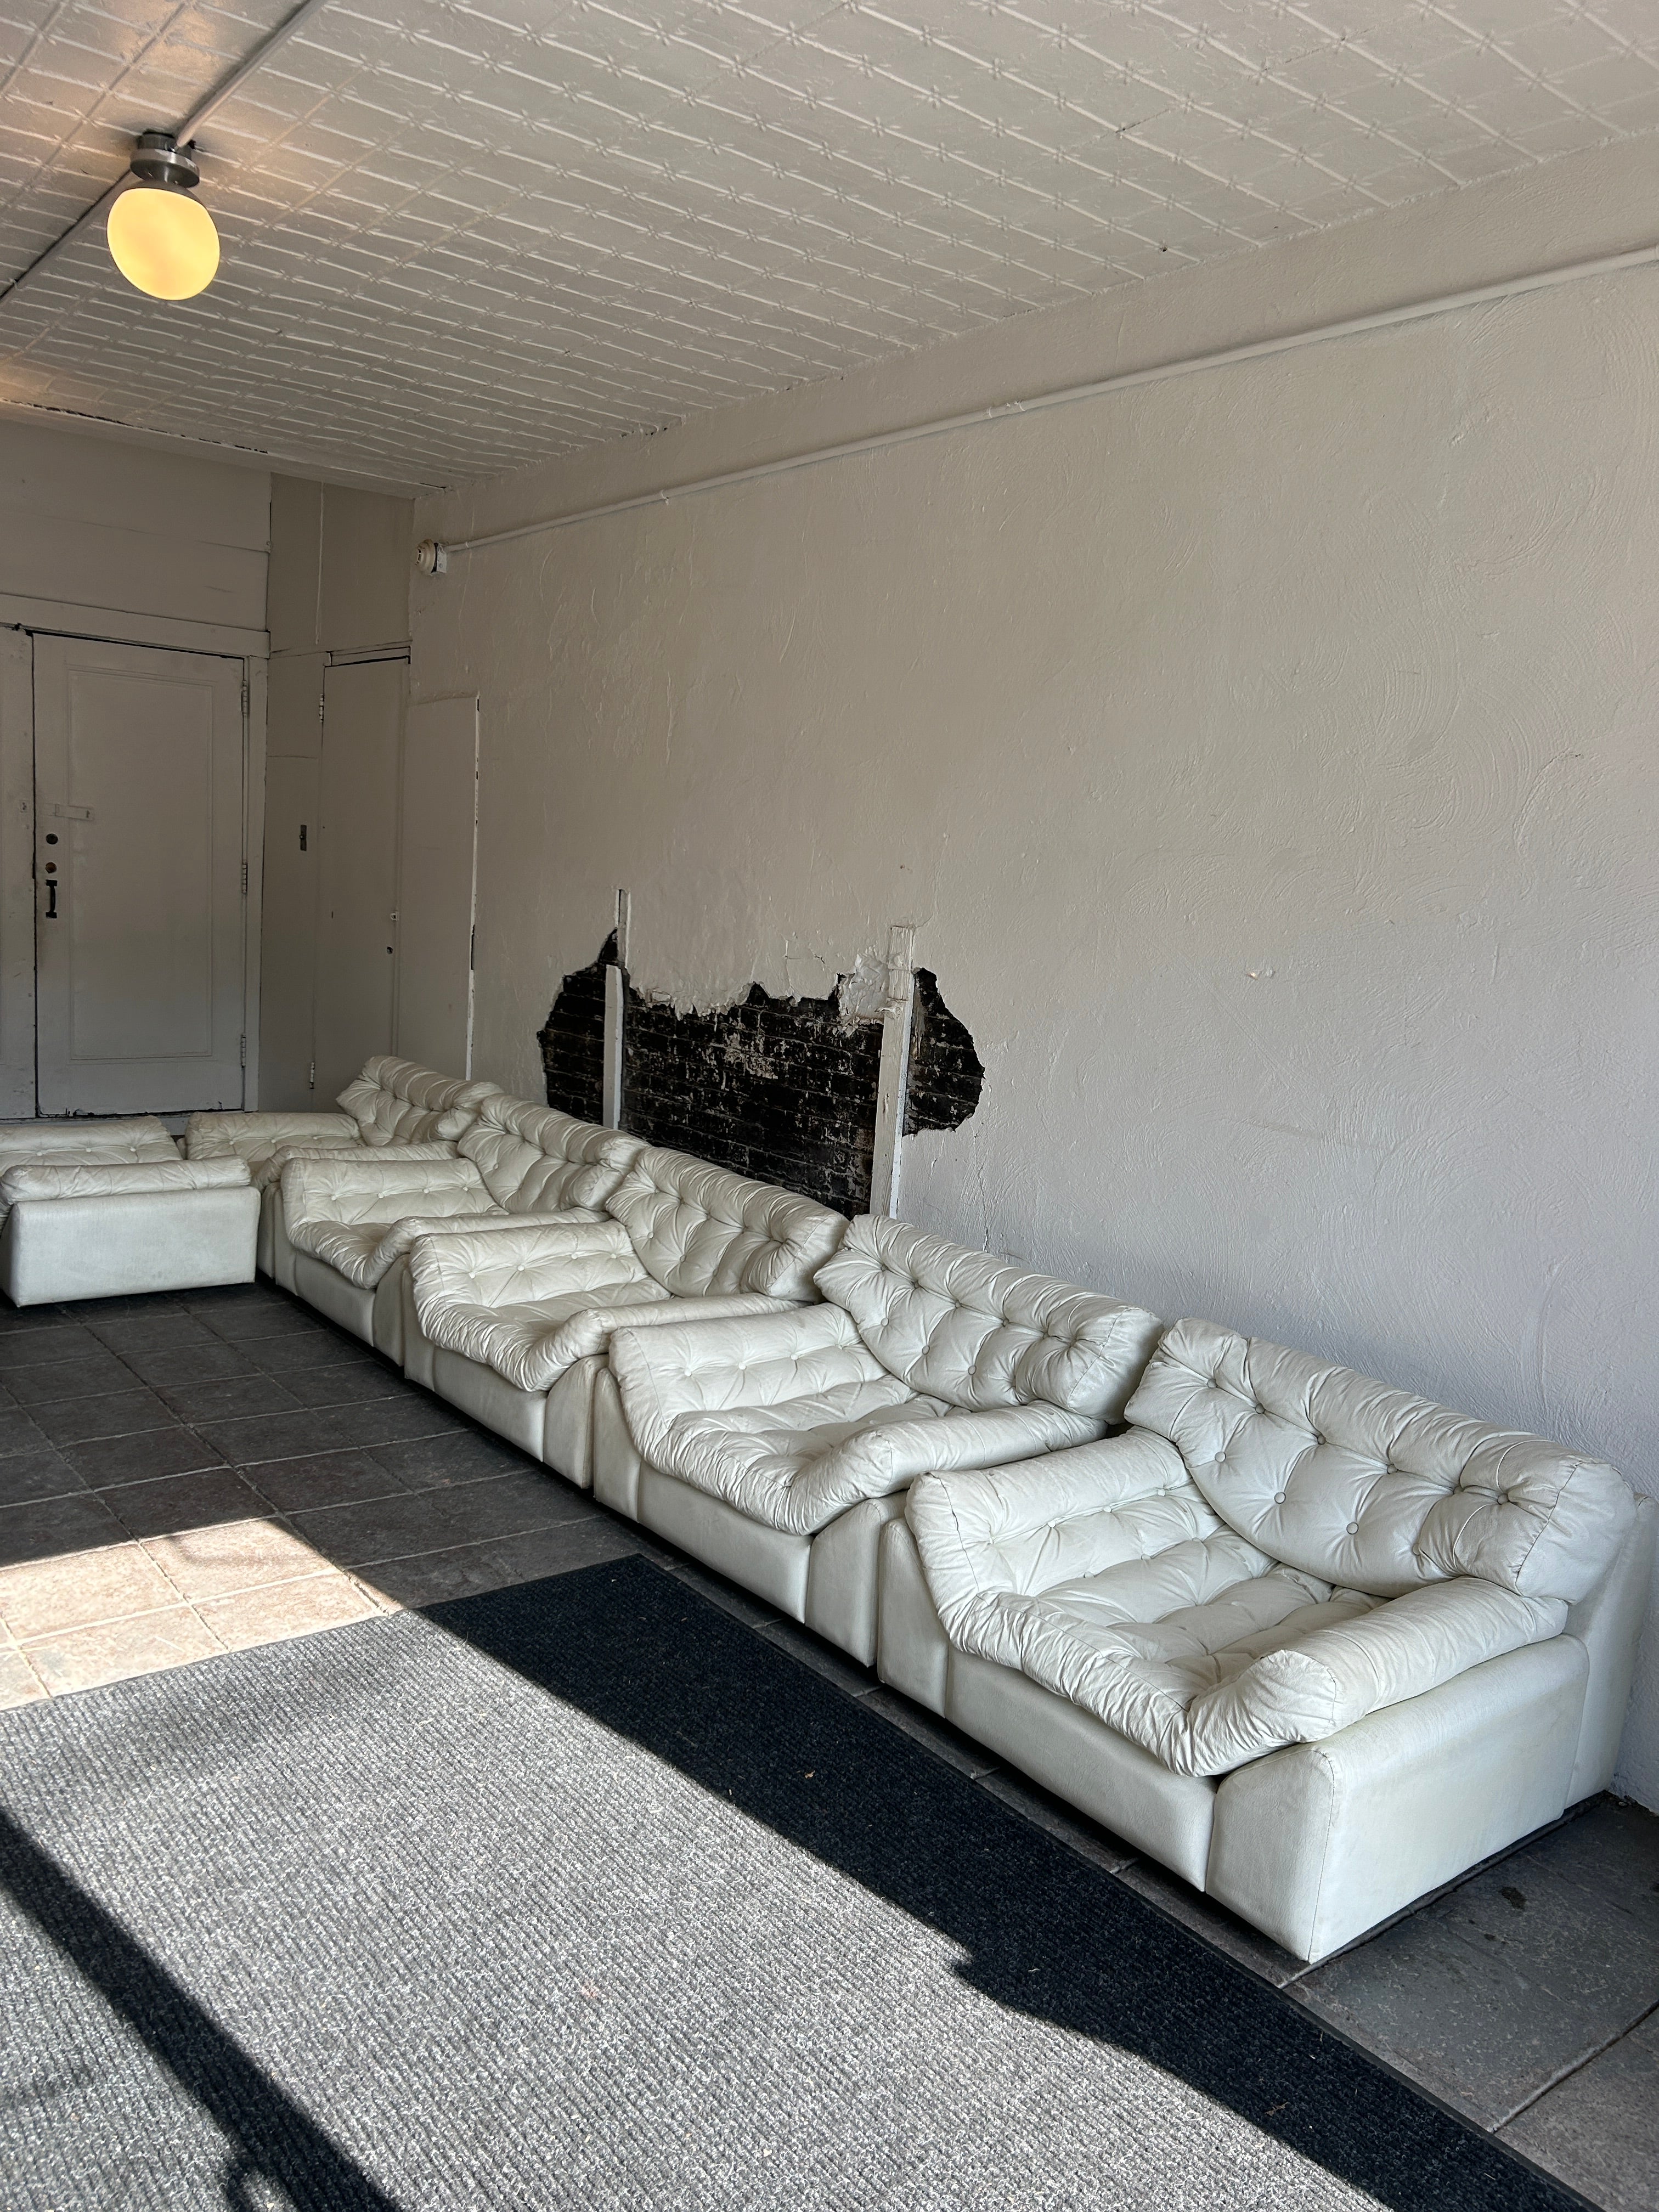 Cool 6 piece Swedish Post modern pop art Low sectional sofa by Lennart Bender Swedish modern pop art 1970s lounge sofa/chairs with (1) ottoman by Lennart Bender for charlton company inc. Very Rare set - bright white Faux leather tufted very low set